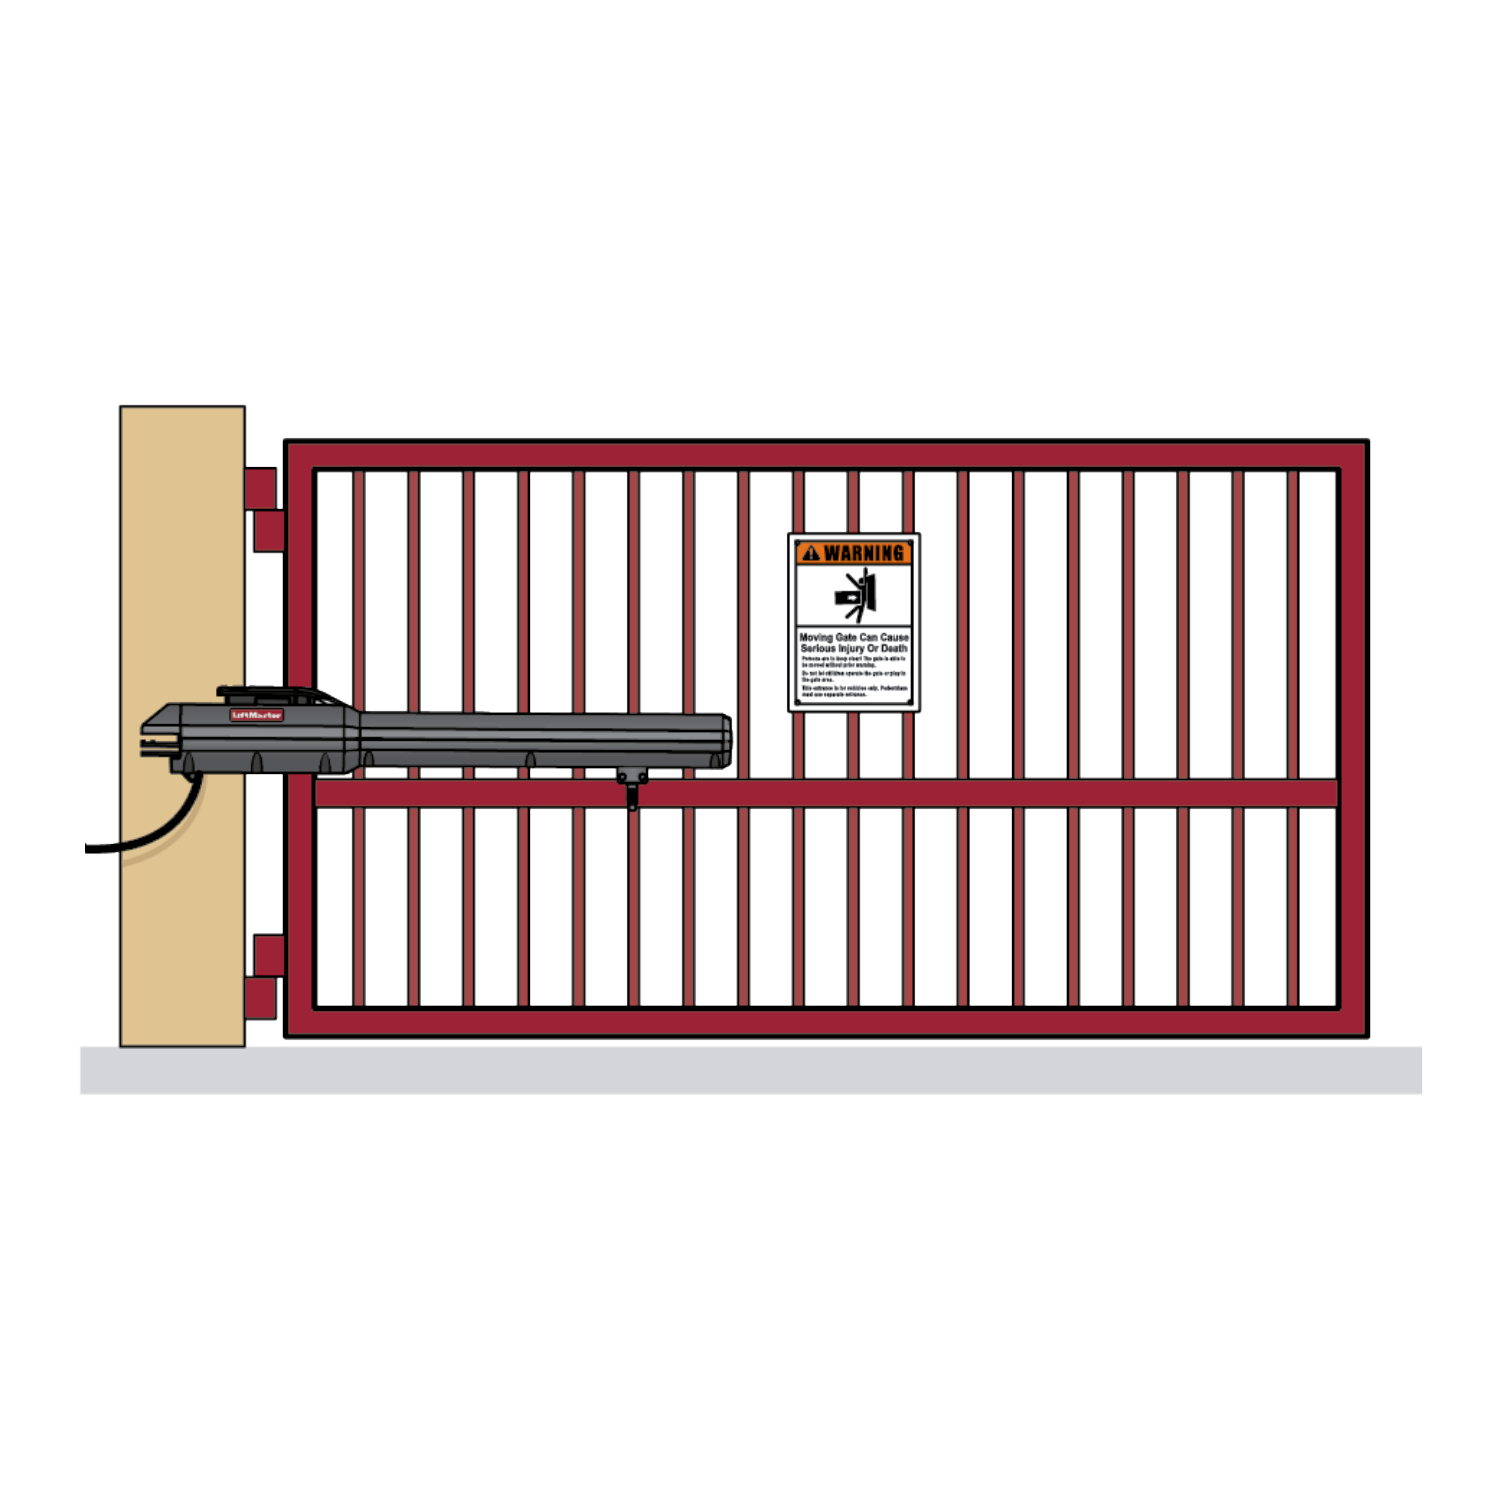 Learn how to install the Liftmaster LA500PKGUL gate opener with this comprehensive step-by-step guide.